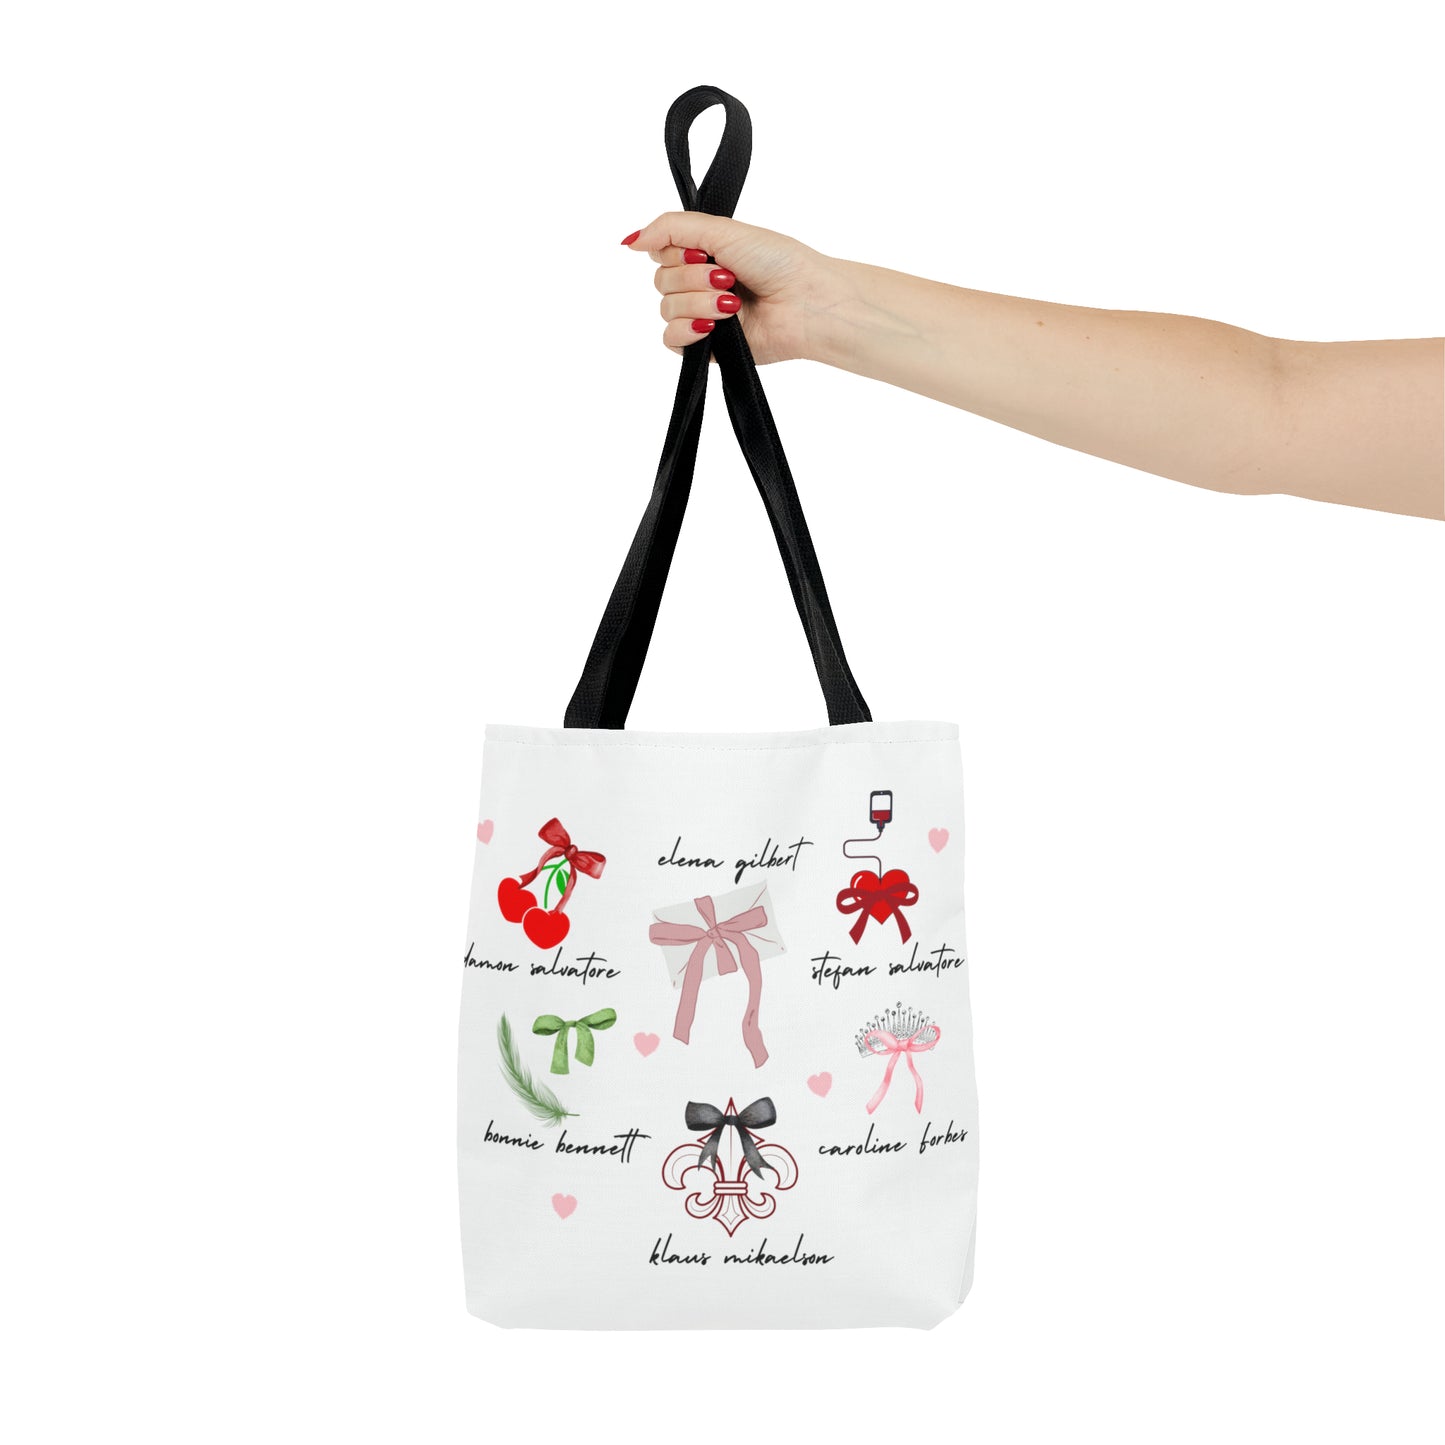 Personalized TVD Tote Bag